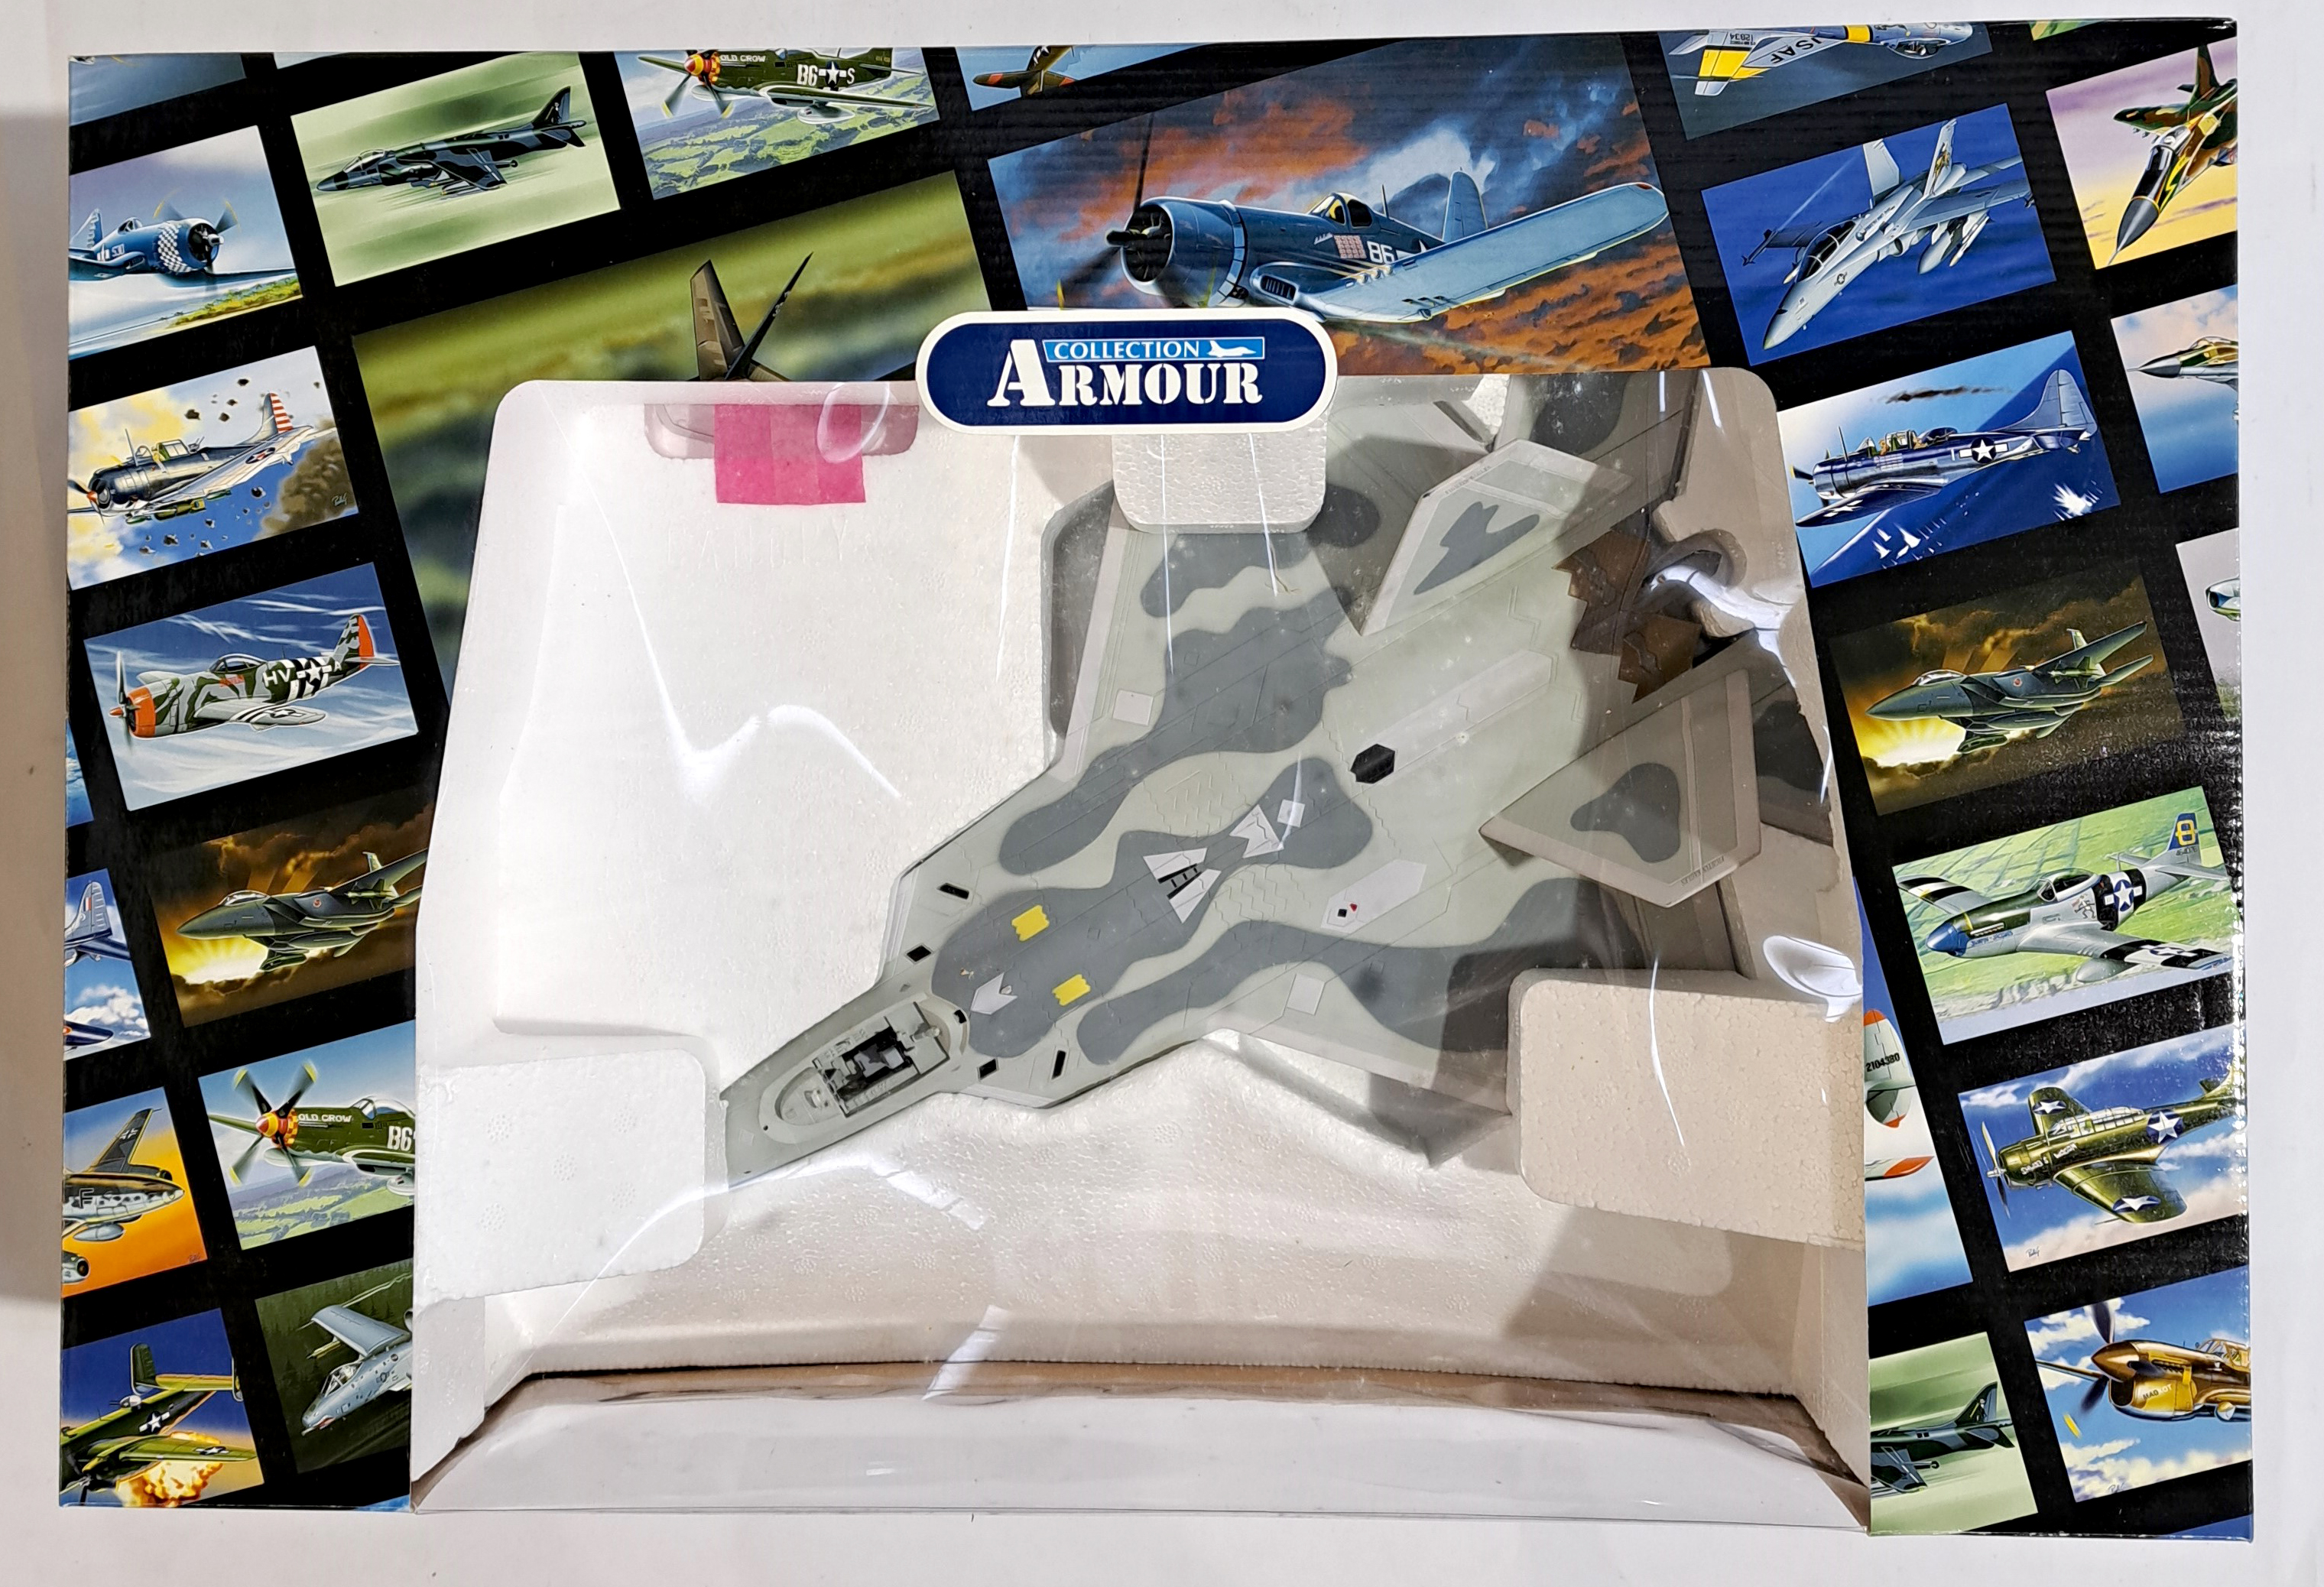 Franklin Mint  "Armour Collection", a boxed 1:48 scale B11E760 F22 Raptor